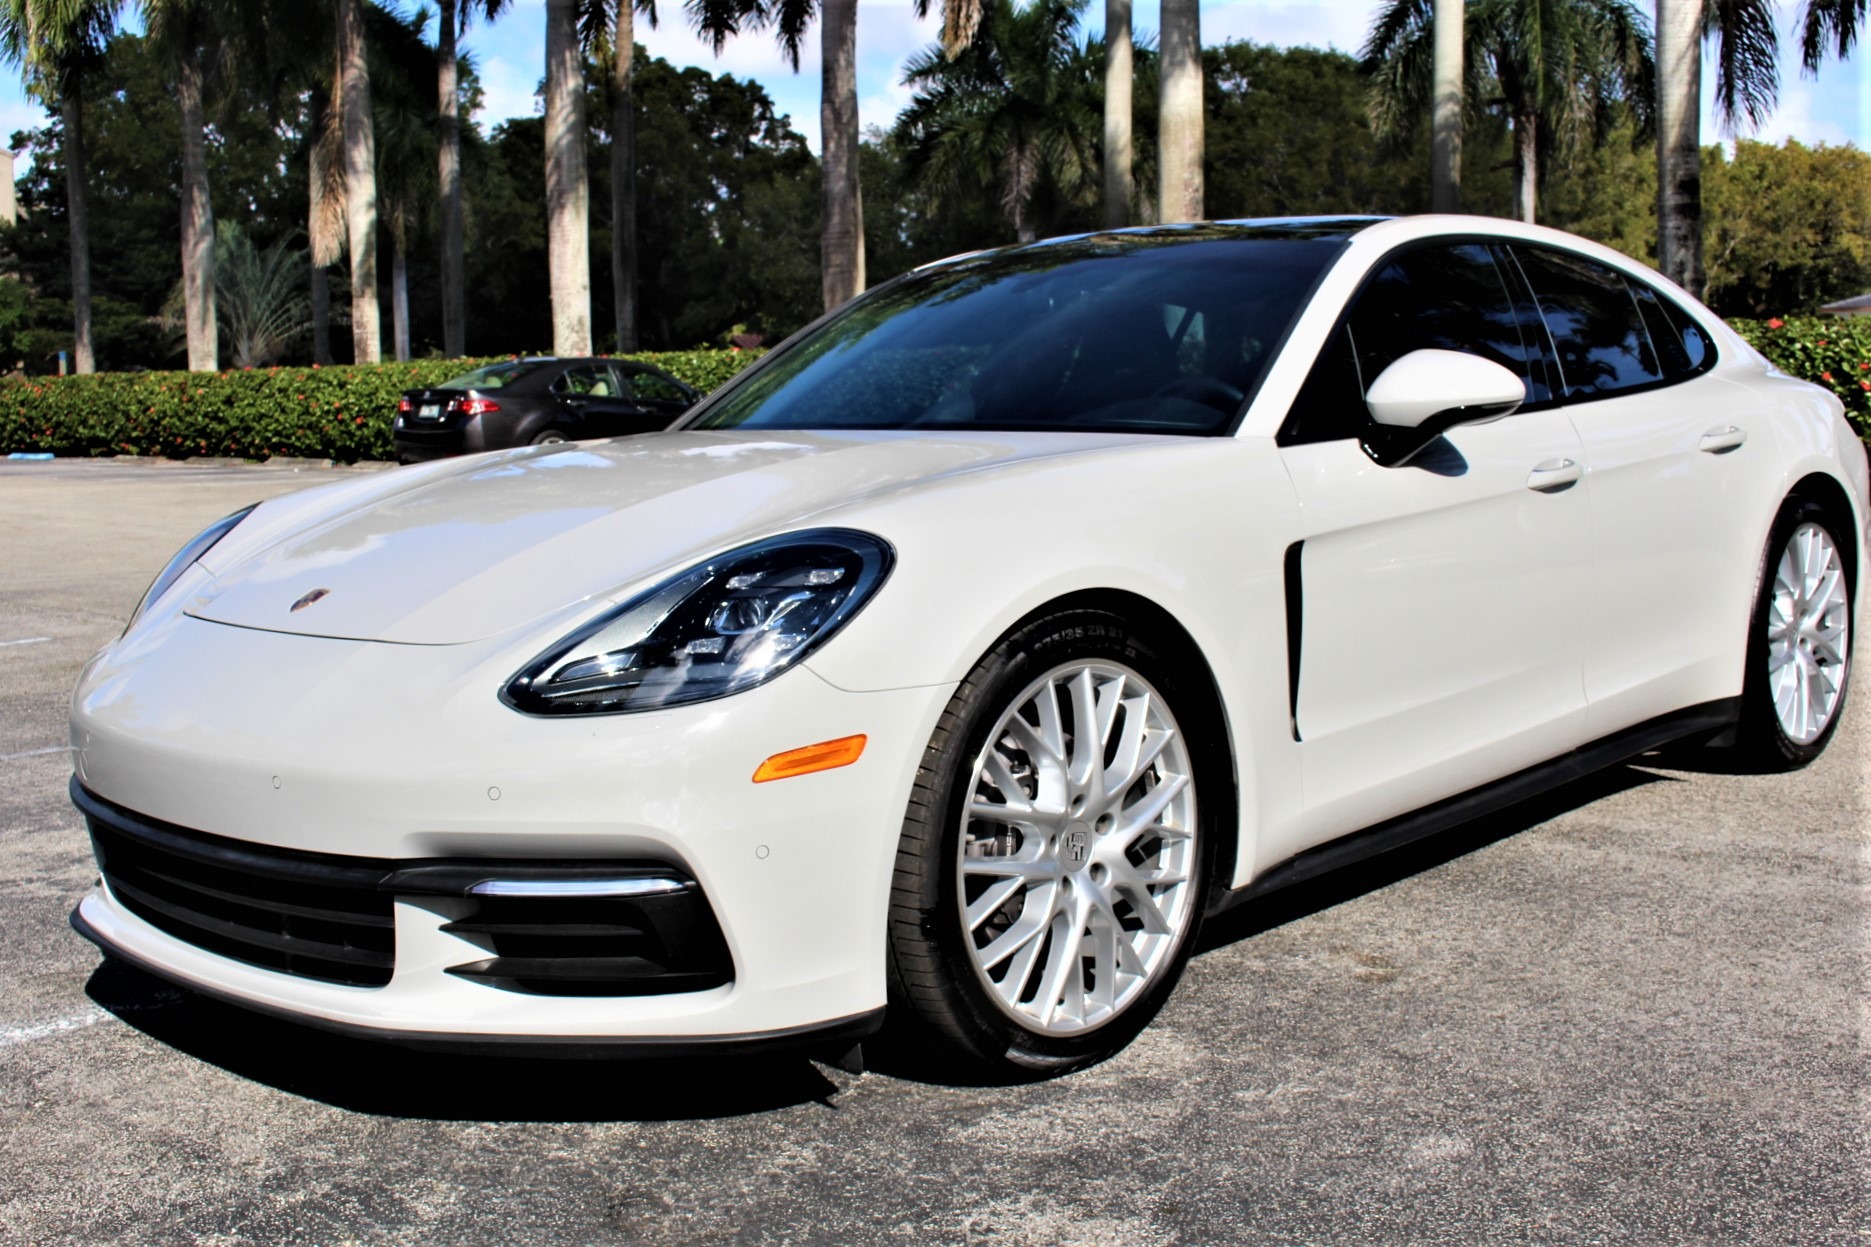 Used 2018 Porsche Panamera BASE for sale $79,450 at The Gables Sports Cars in Miami FL 33146 3